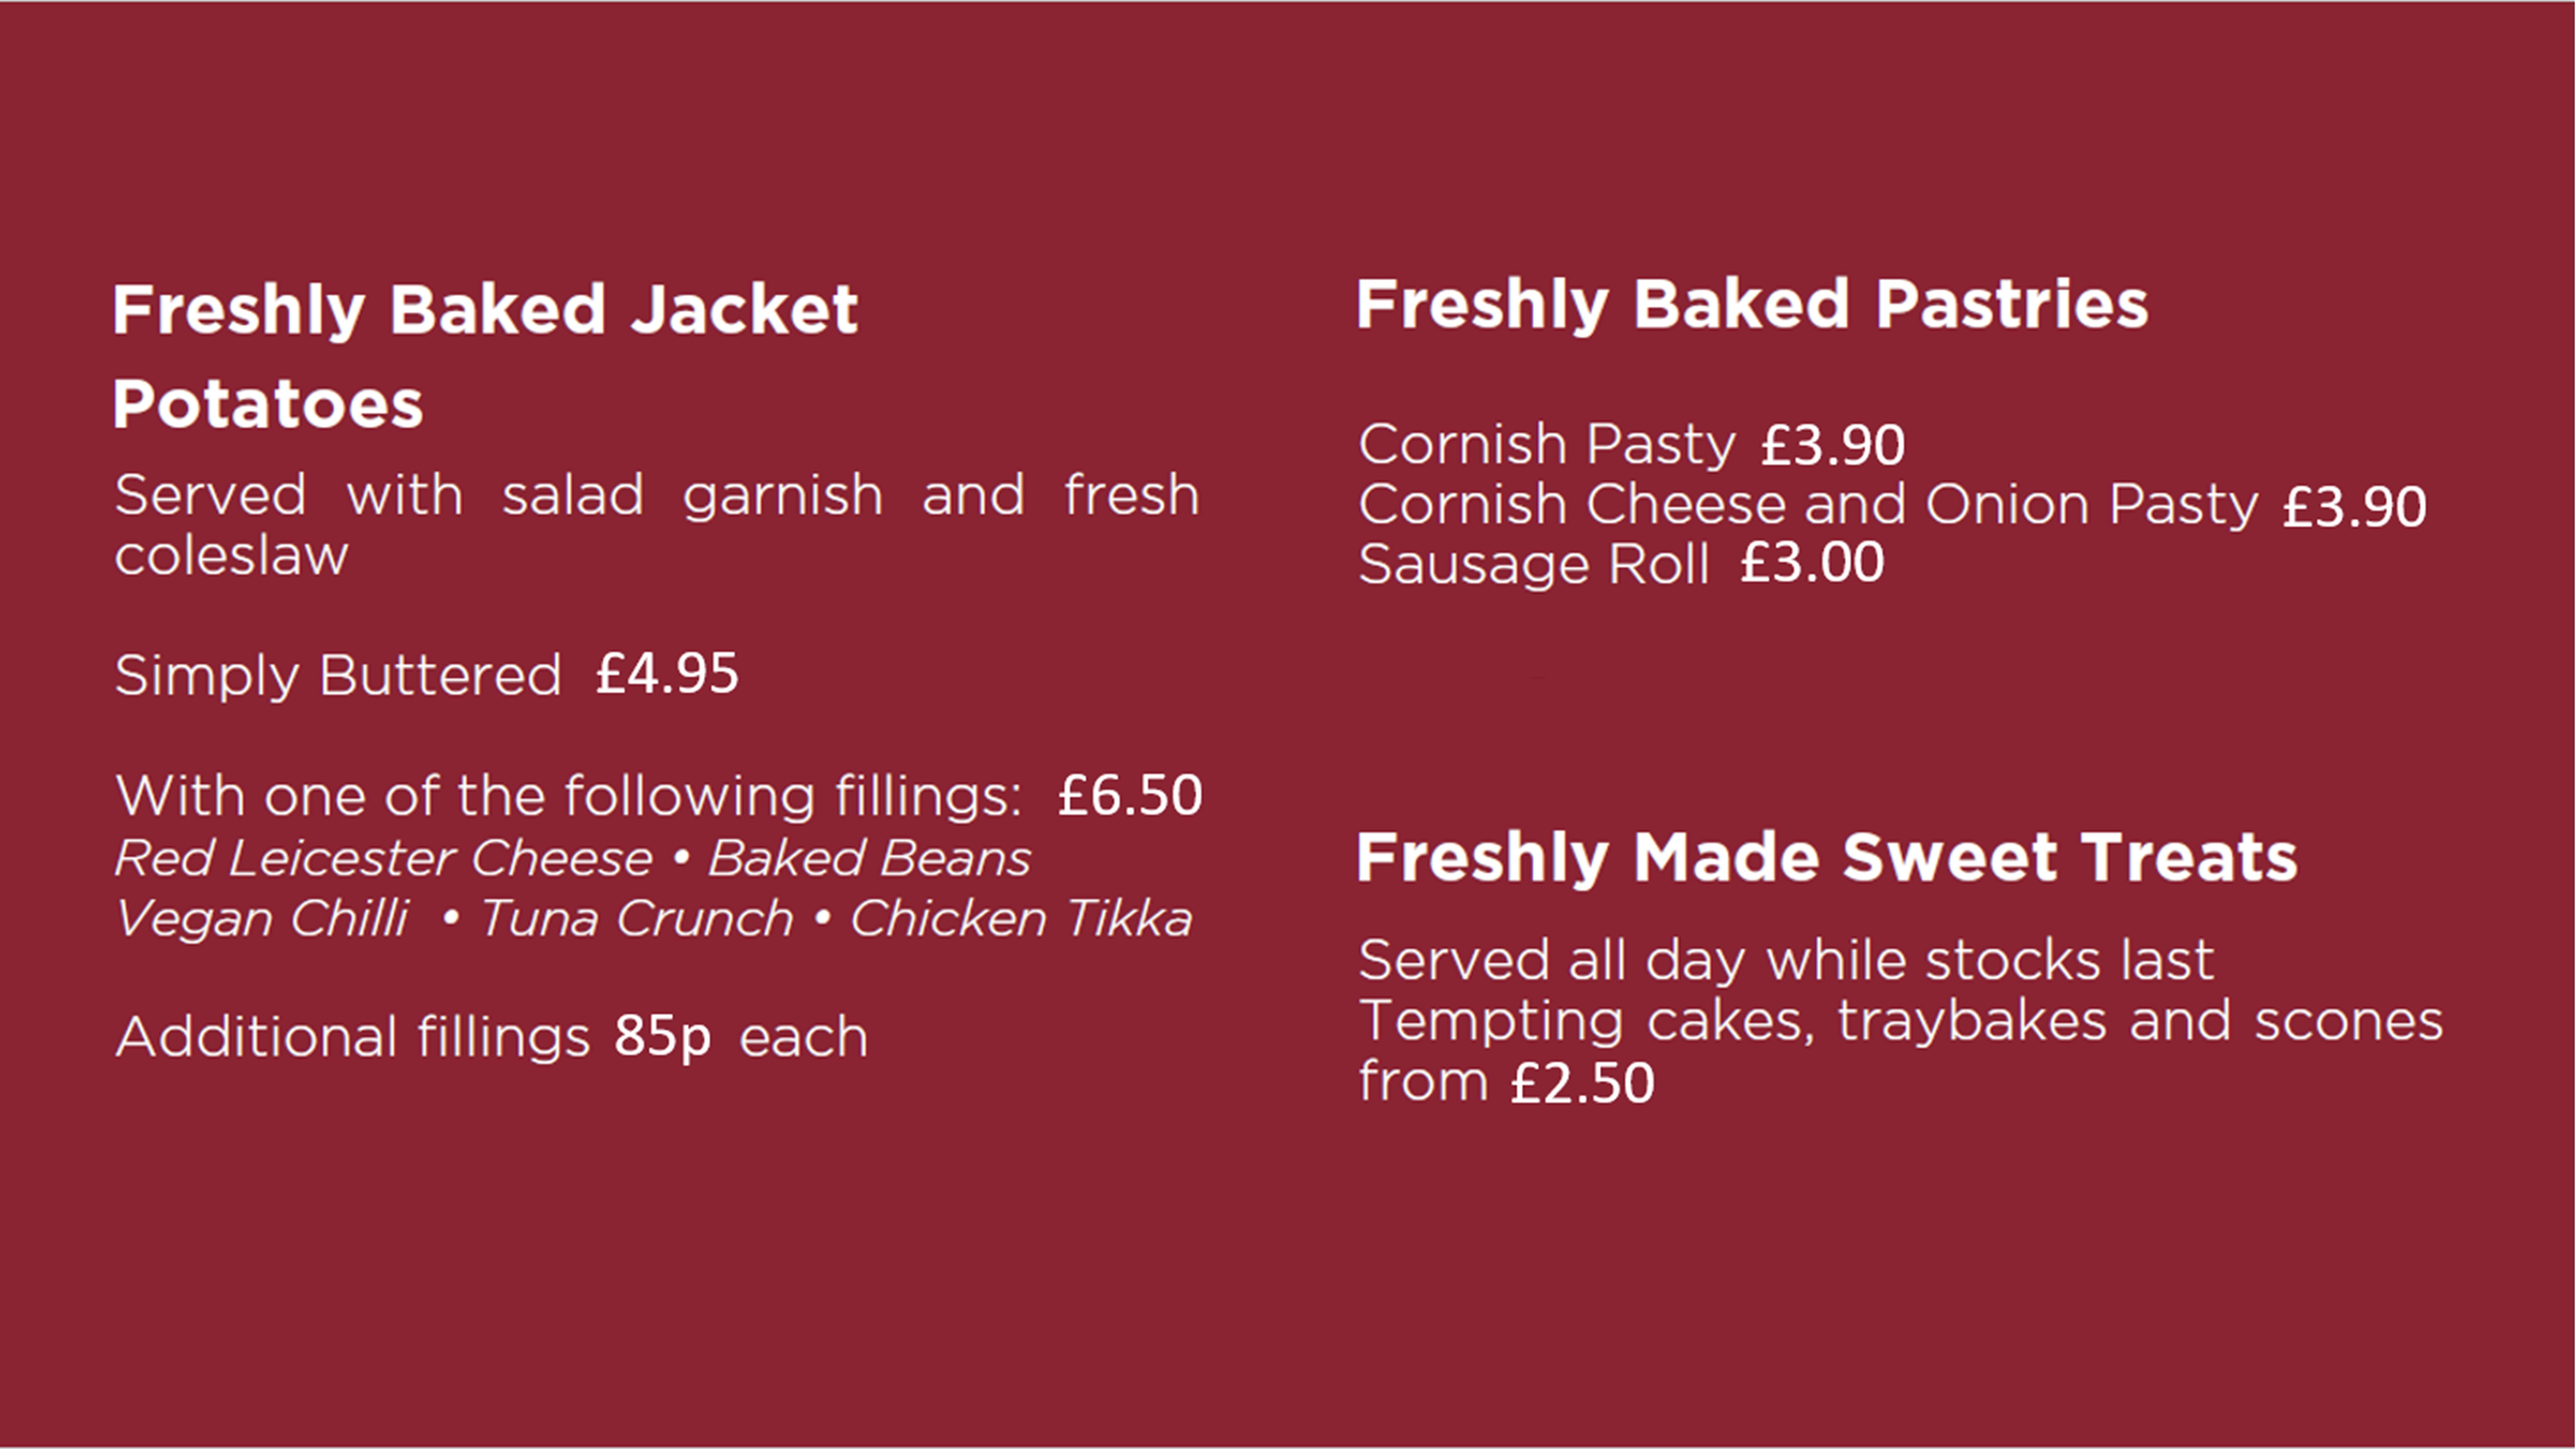 Freshly Baked Jacket Potatoes £4.95 to £6.50 depending on fillings, Freshly Baked Pastries from £3.00 to £3.90, Freshly Made Sweet Treats from £2.50 while stocks last